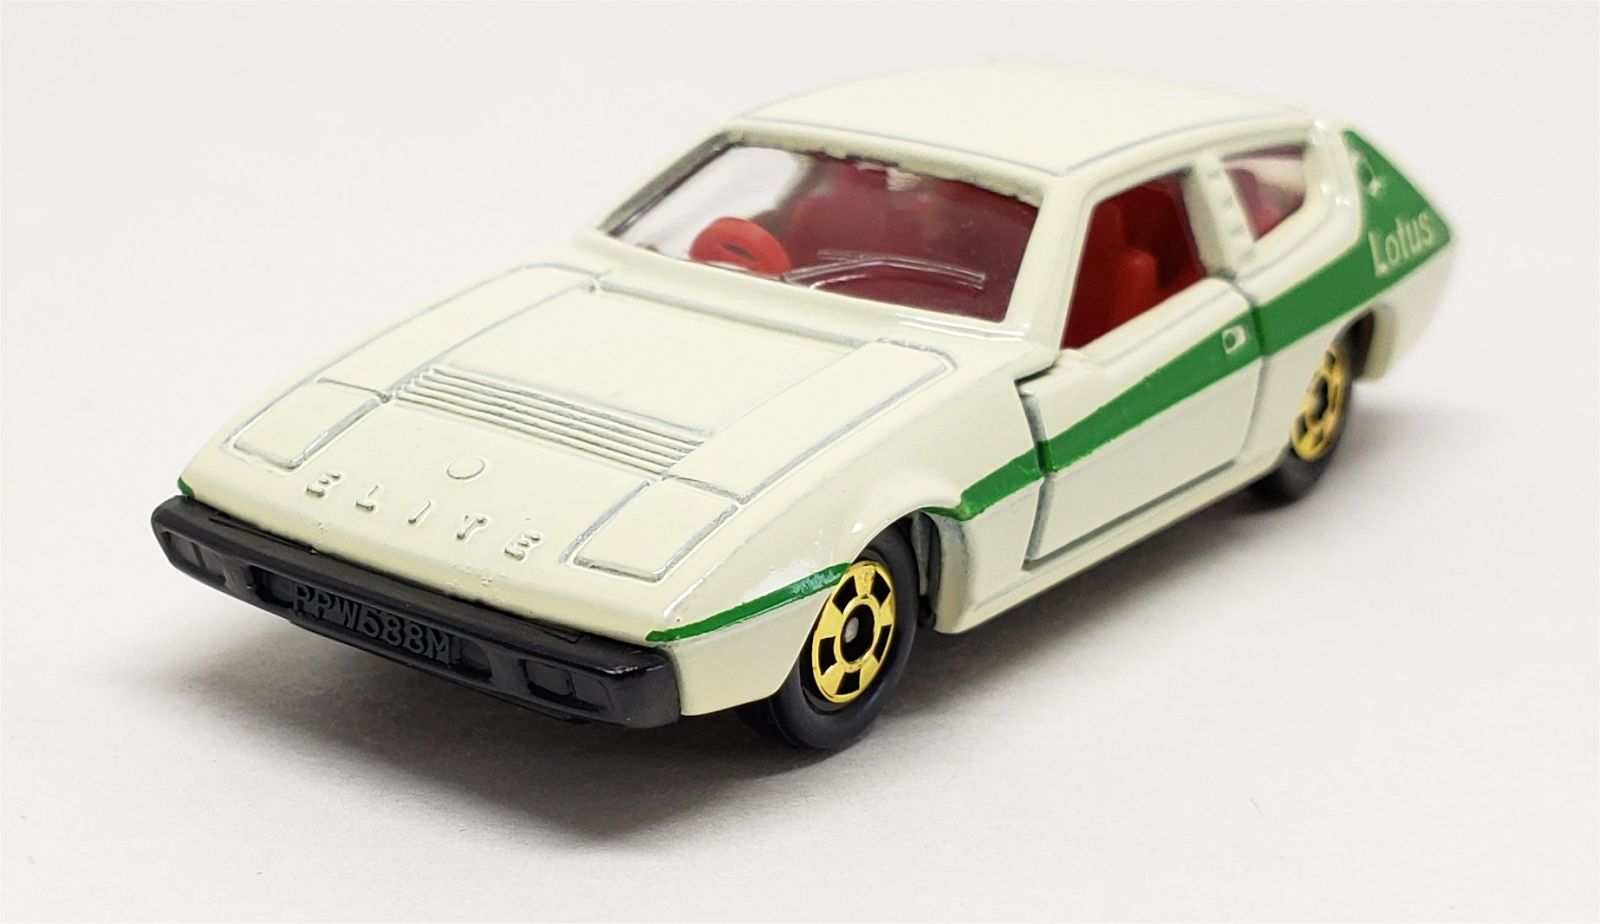 Illustration for article titled [REVIEW] Tomica Lotus Elite